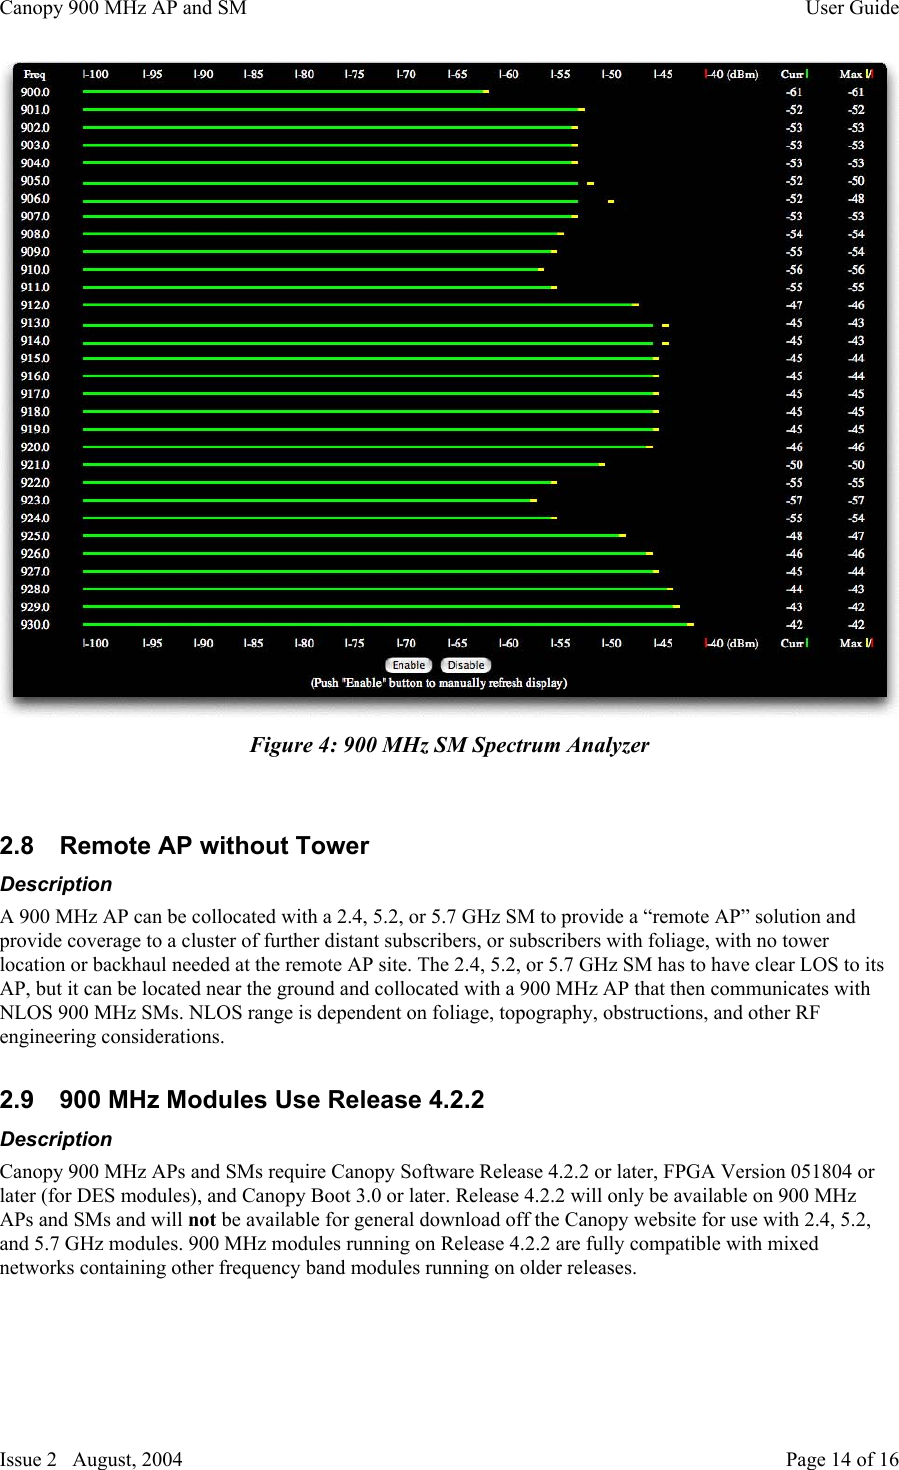 Canopy 900 MHz AP and SM User GuideIssue 2   August, 2004 Page 14 of 16Figure 4: 900 MHz SM Spectrum Analyzer2.8  Remote AP without TowerDescriptionA 900 MHz AP can be collocated with a 2.4, 5.2, or 5.7 GHz SM to provide a “remote AP” solution andprovide coverage to a cluster of further distant subscribers, or subscribers with foliage, with no towerlocation or backhaul needed at the remote AP site. The 2.4, 5.2, or 5.7 GHz SM has to have clear LOS to itsAP, but it can be located near the ground and collocated with a 900 MHz AP that then communicates withNLOS 900 MHz SMs. NLOS range is dependent on foliage, topography, obstructions, and other RFengineering considerations.2.9  900 MHz Modules Use Release 4.2.2DescriptionCanopy 900 MHz APs and SMs require Canopy Software Release 4.2.2 or later, FPGA Version 051804 orlater (for DES modules), and Canopy Boot 3.0 or later. Release 4.2.2 will only be available on 900 MHzAPs and SMs and will not be available for general download off the Canopy website for use with 2.4, 5.2,and 5.7 GHz modules. 900 MHz modules running on Release 4.2.2 are fully compatible with mixednetworks containing other frequency band modules running on older releases.